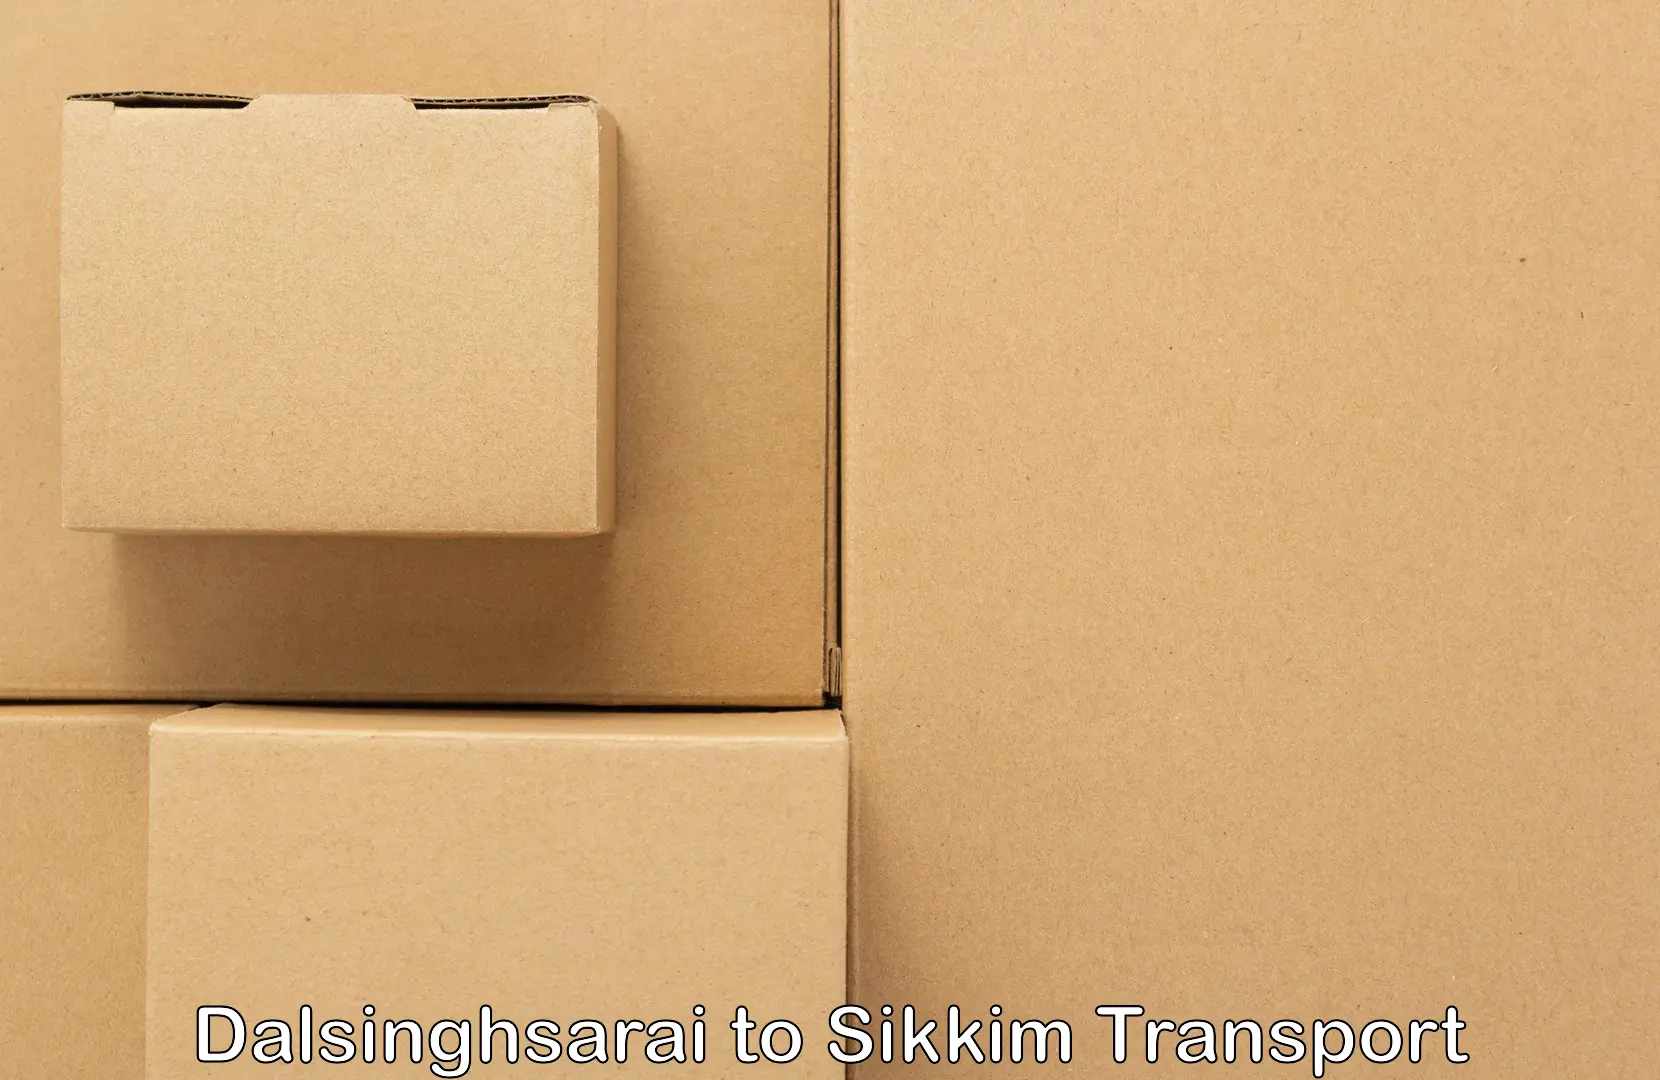 Truck transport companies in India in Dalsinghsarai to North Sikkim